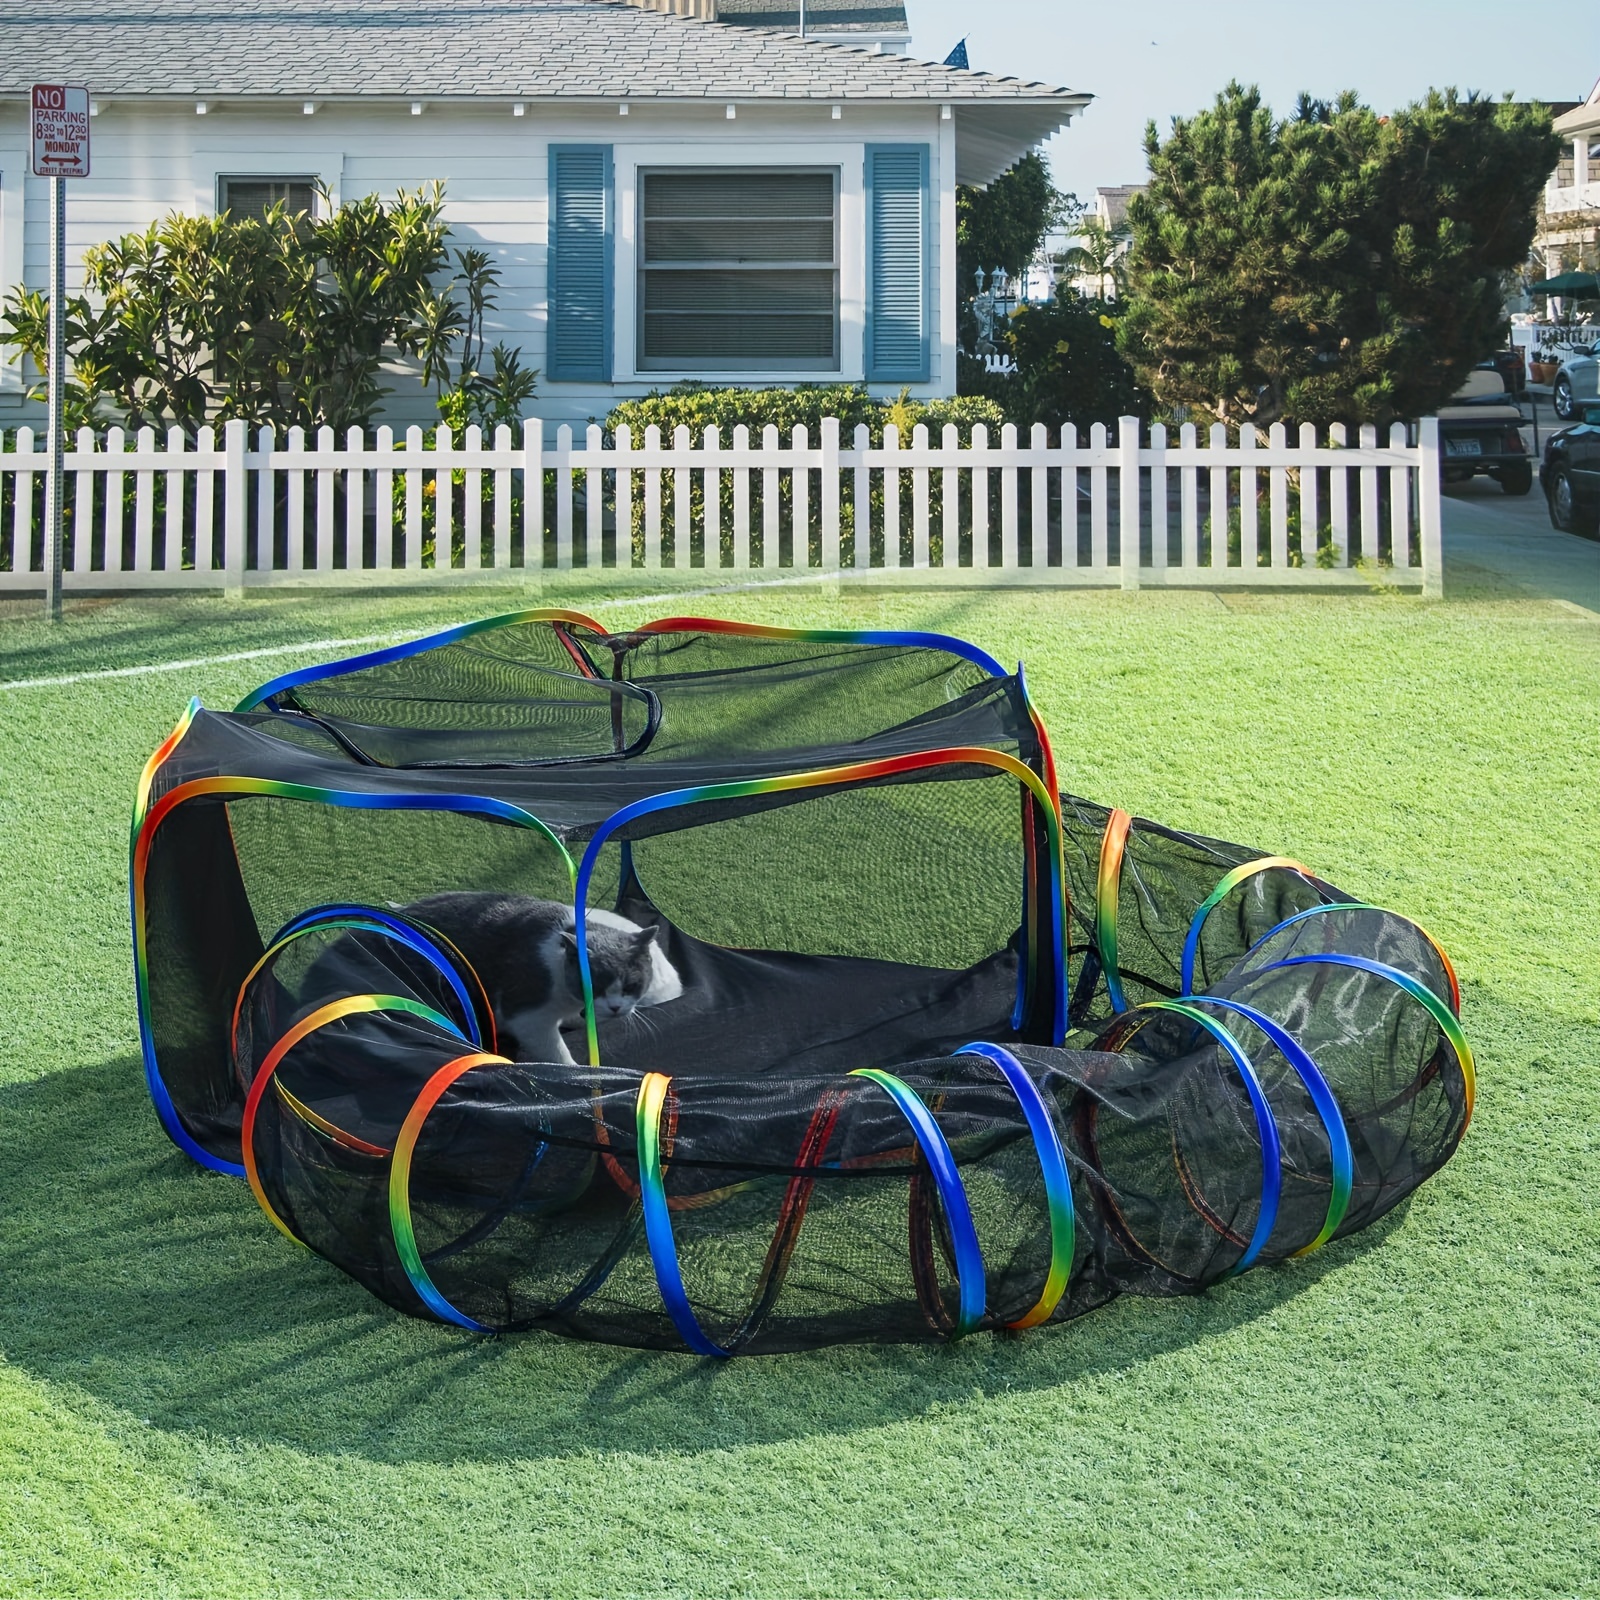 

Outdoor Rainbow Cat Enclosures Playground, Outside House For Indoor Cats Include Portable Cat Tent, Circle Playpen Tunnel, For Kitty And Small Animals, Within Storage Bag